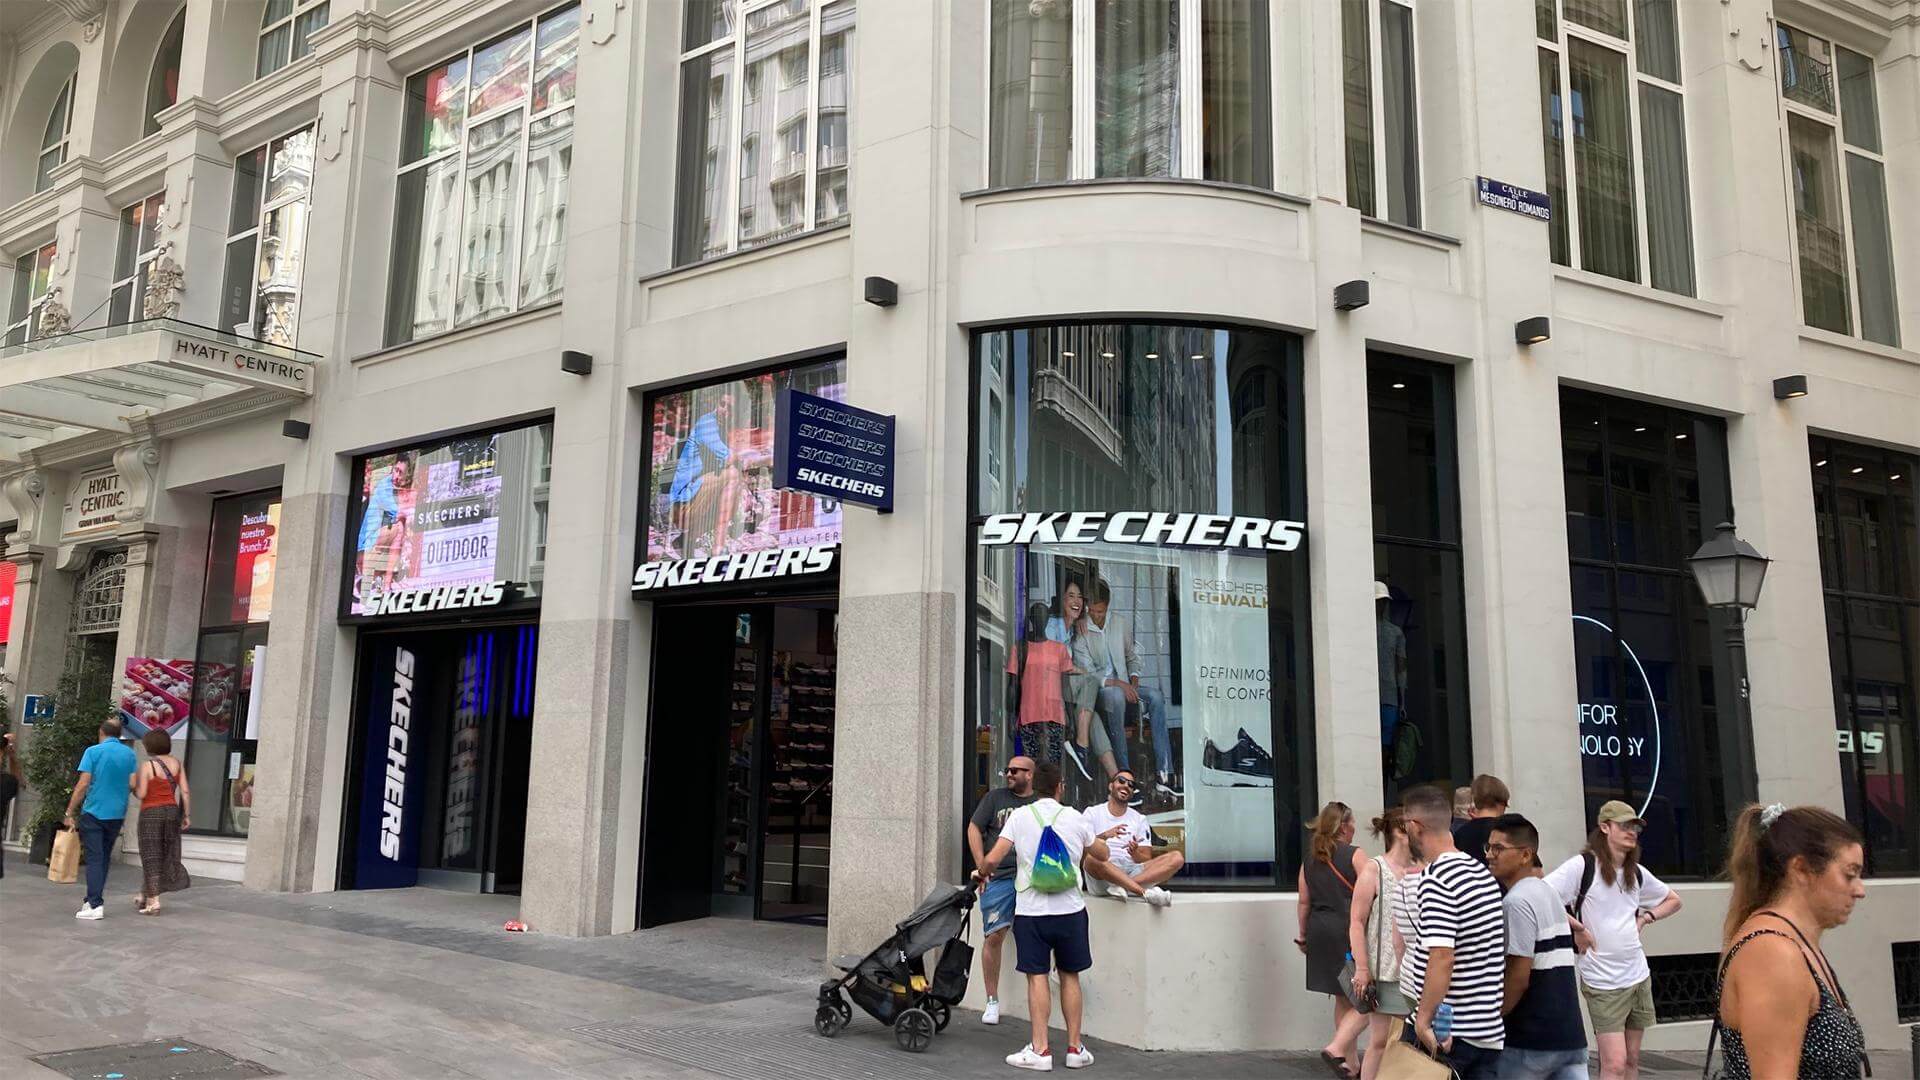 Astra Signs Case Study - Sketchers Madrid